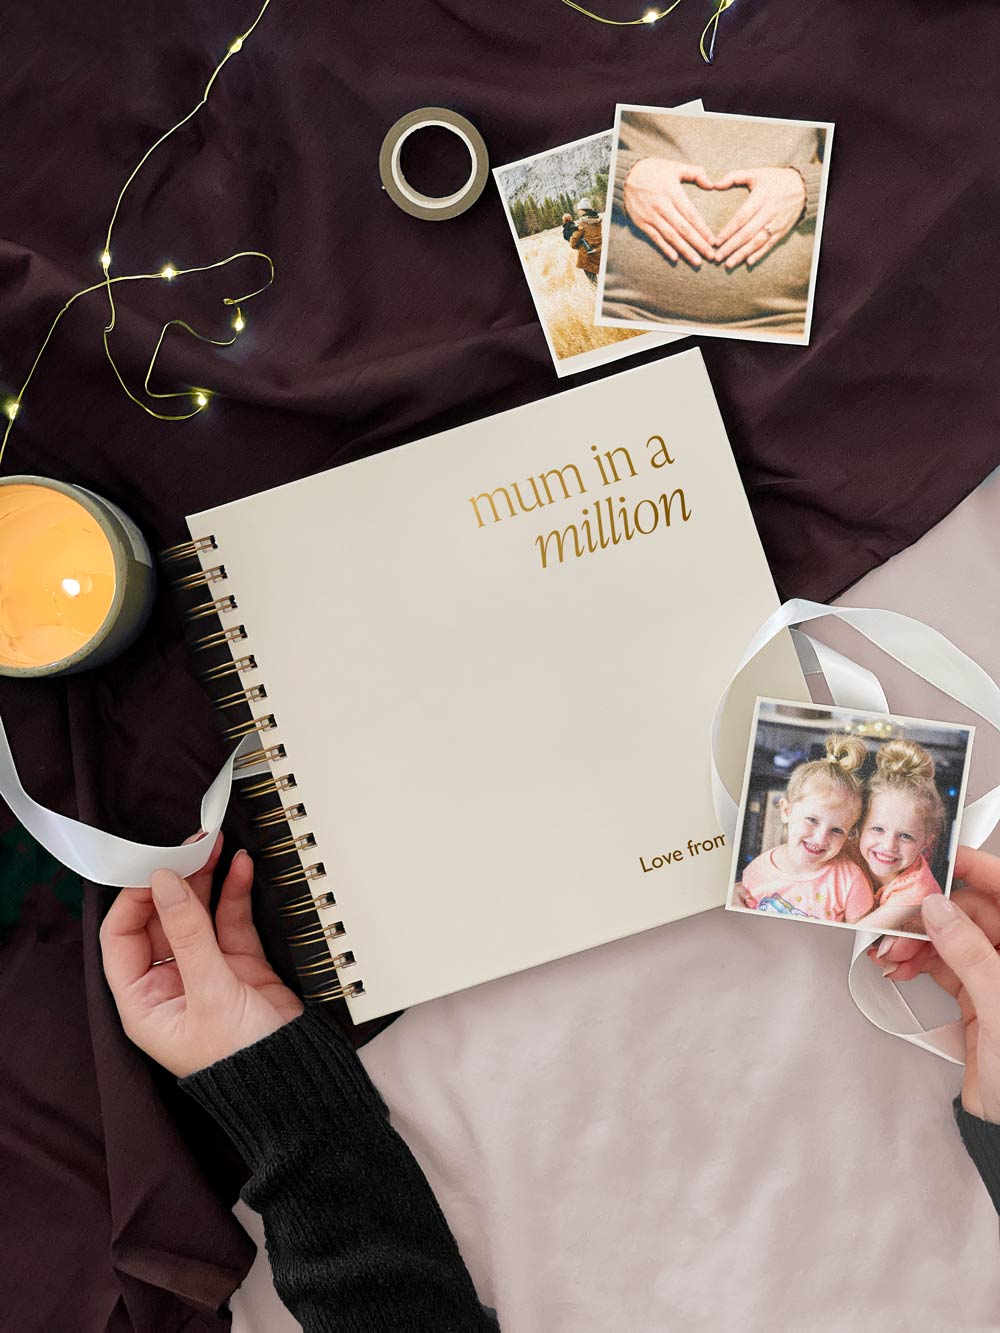 personalised scrapbook reading mum in a million in gold foil surrounded by pictures of mum and daughters on mothers day